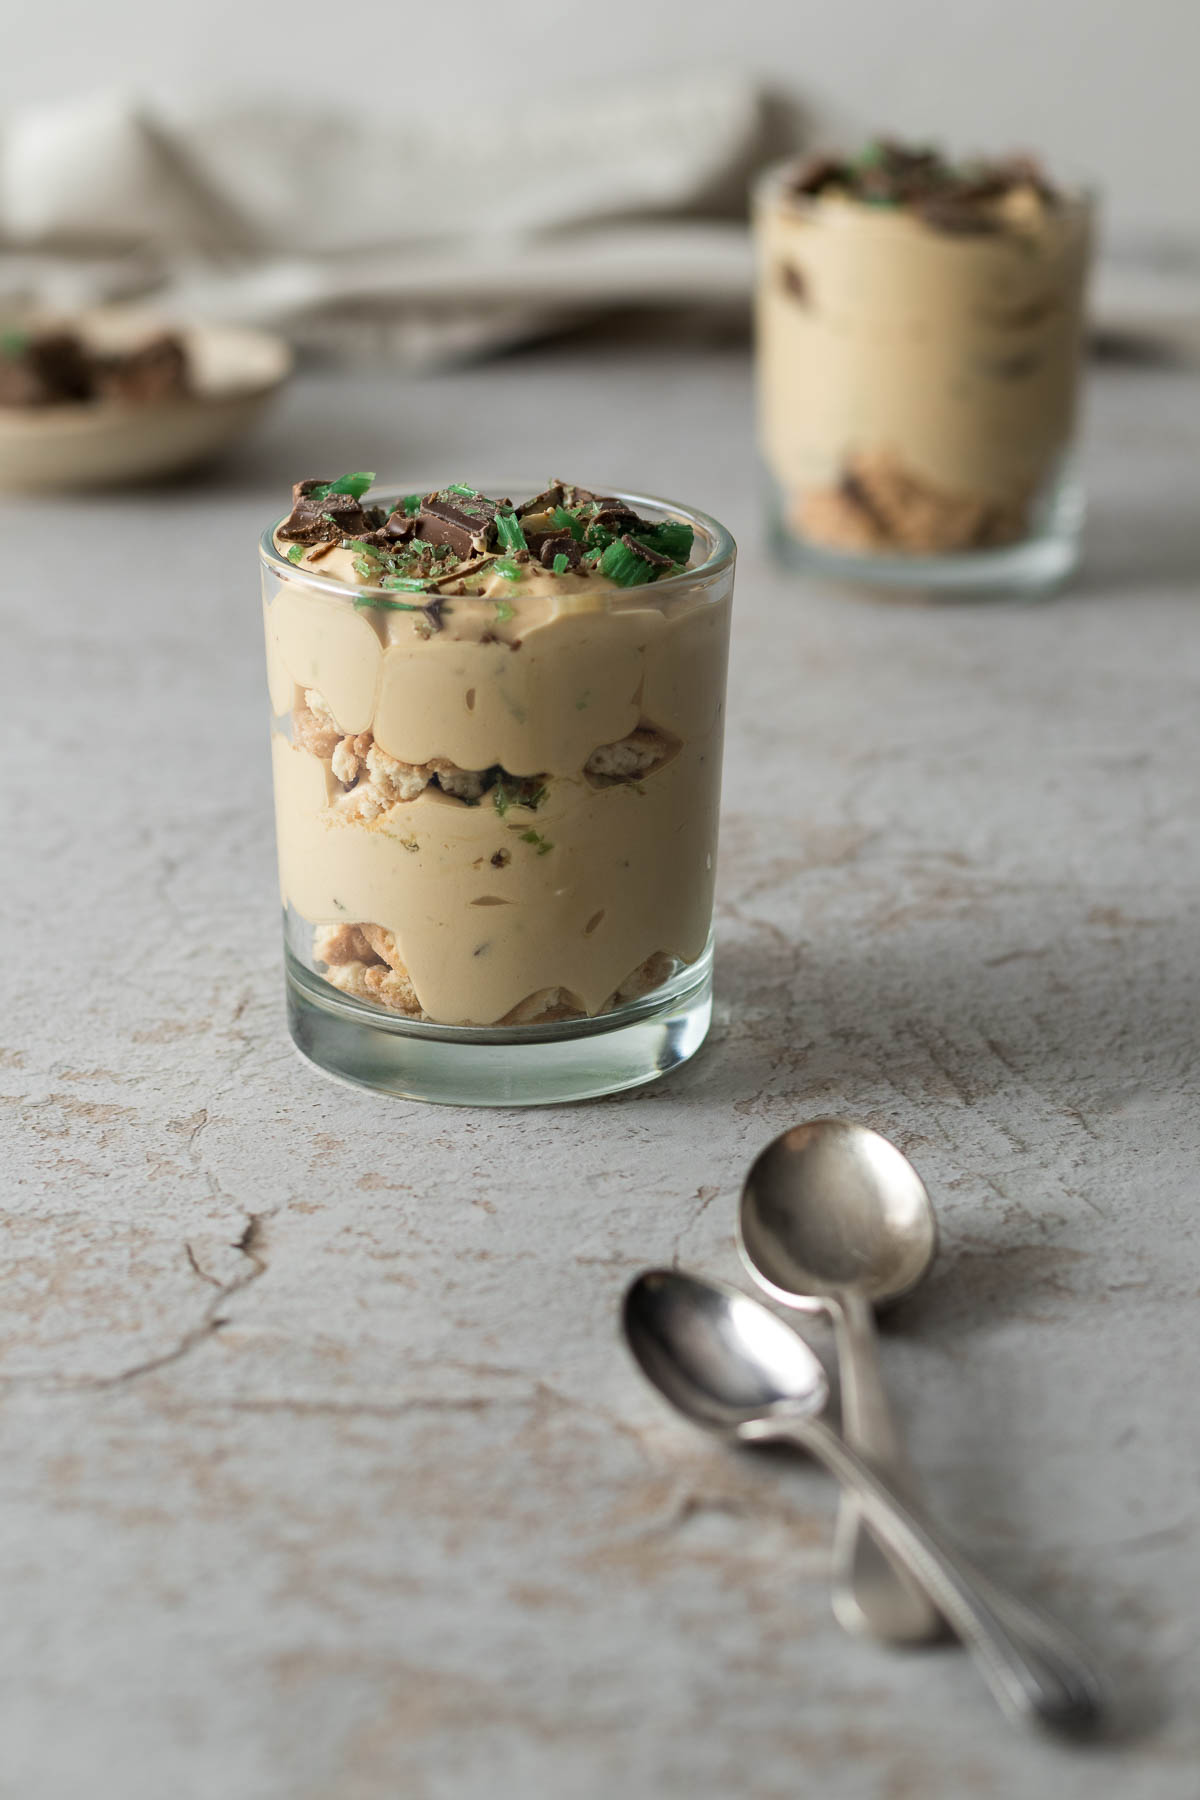 An individual portion of the peppermint crisp tart in a glass showing the layers of biscuit, caramel-cream and mint chocolate pieces.